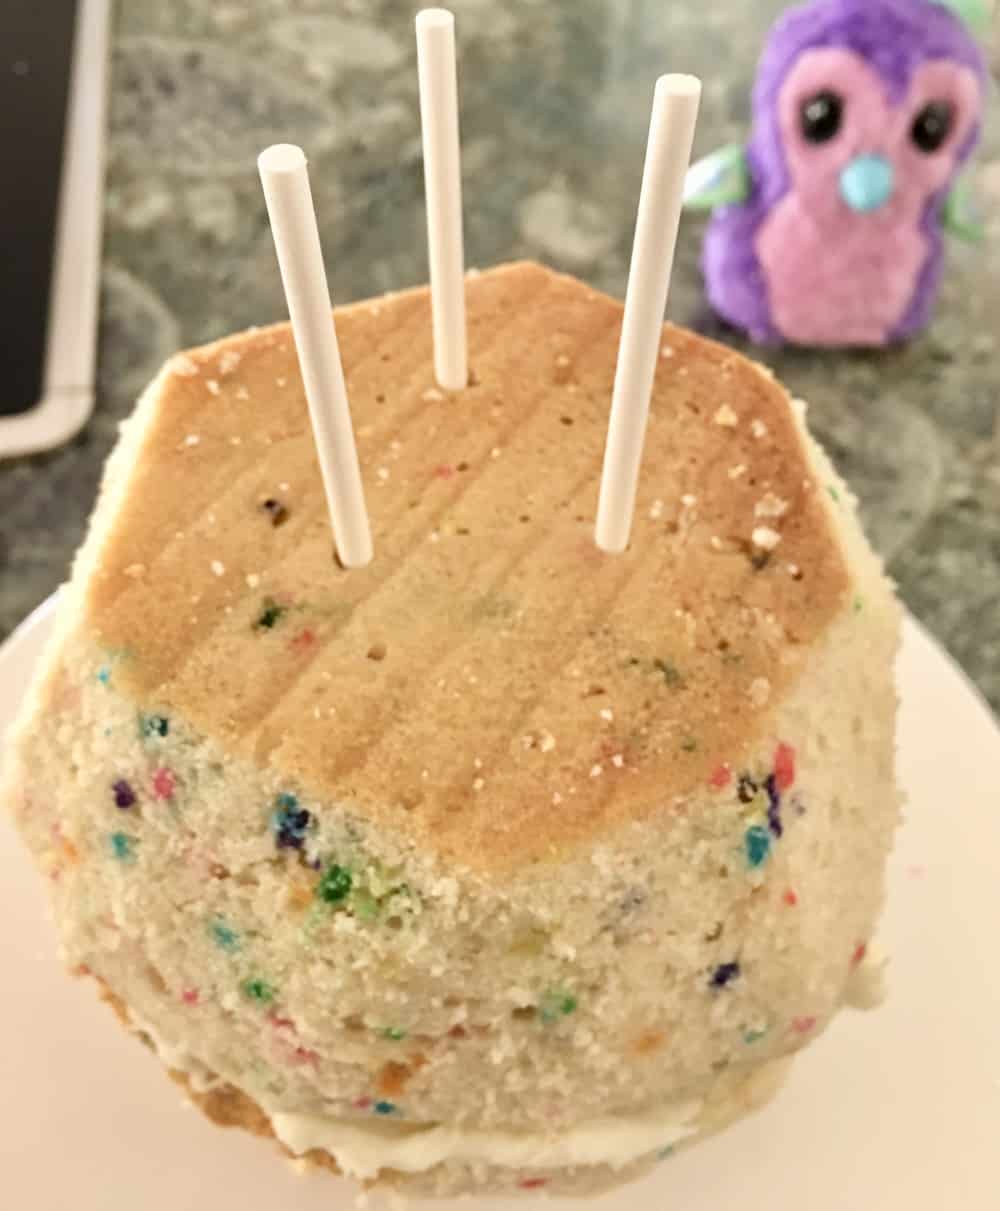 insert three skewers down the body of the hatchimals cake. 